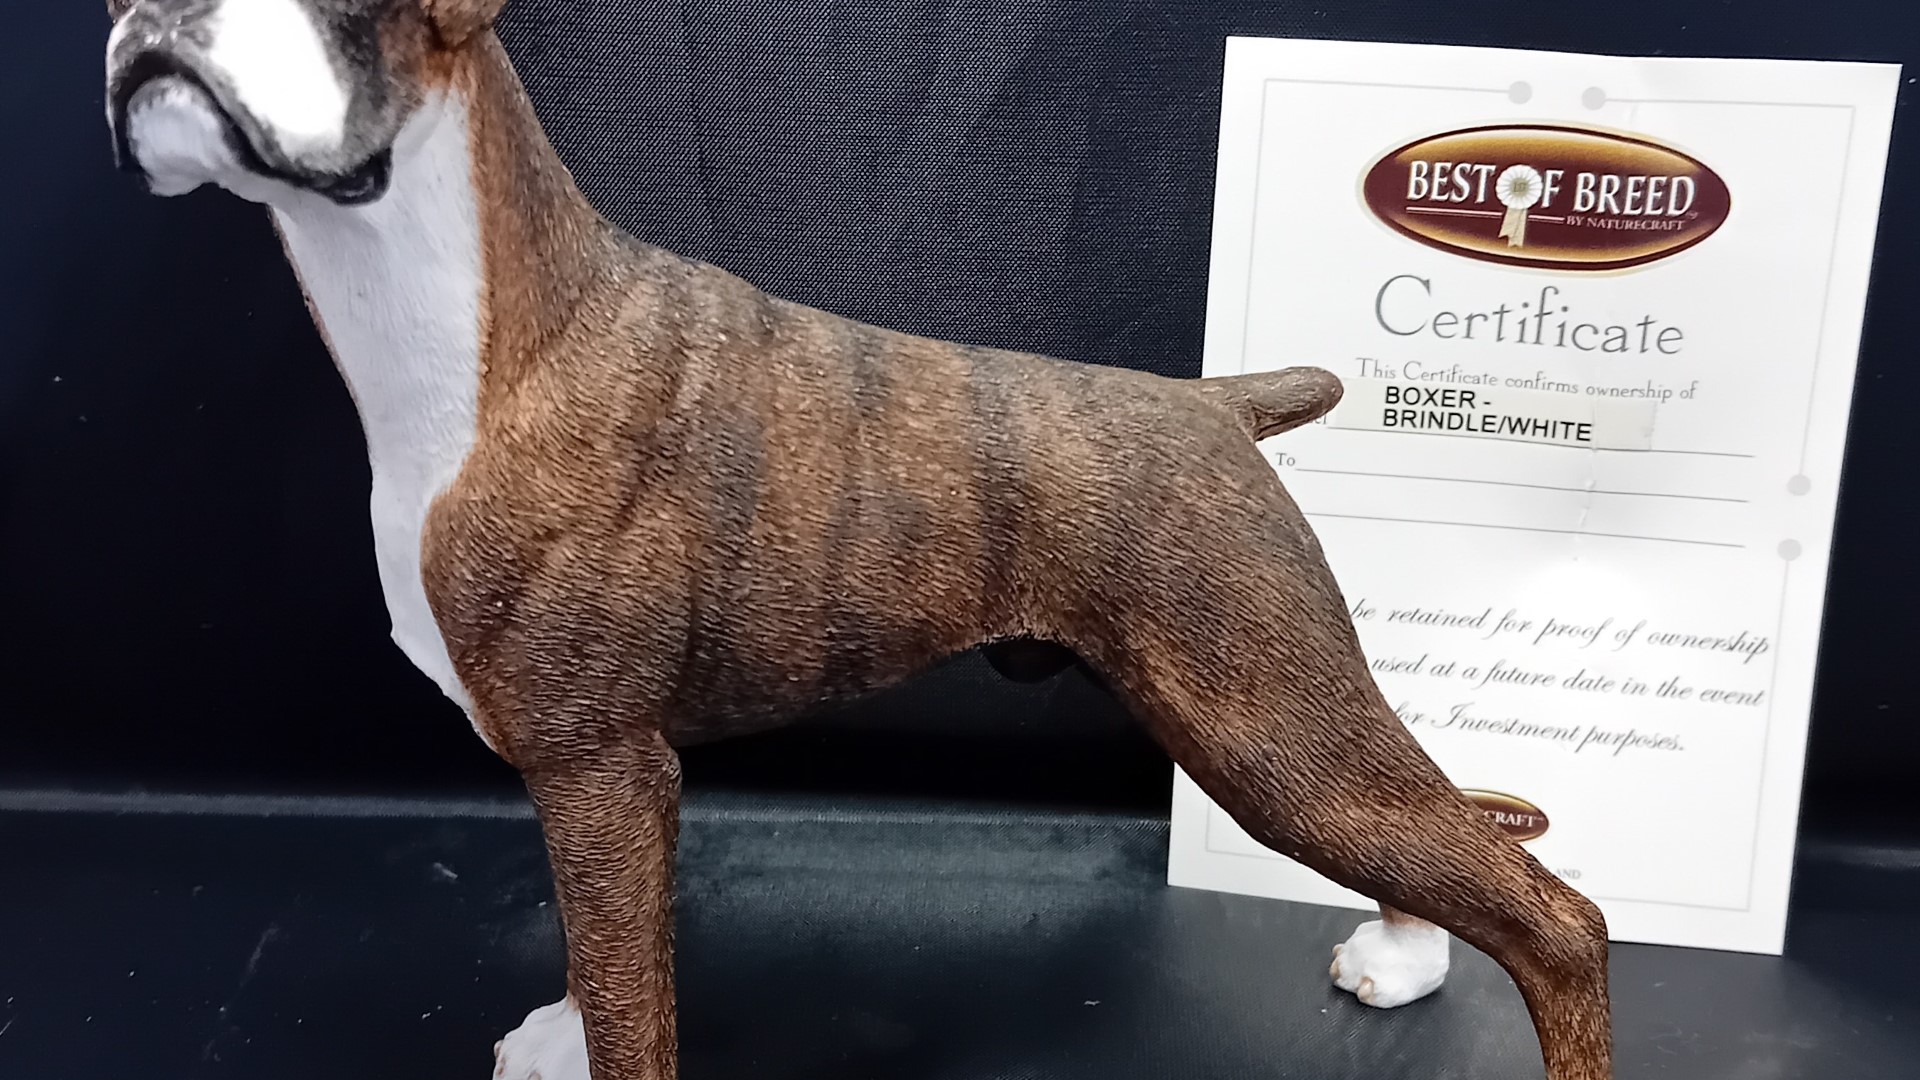 Best of Breed Boxer Sculpture